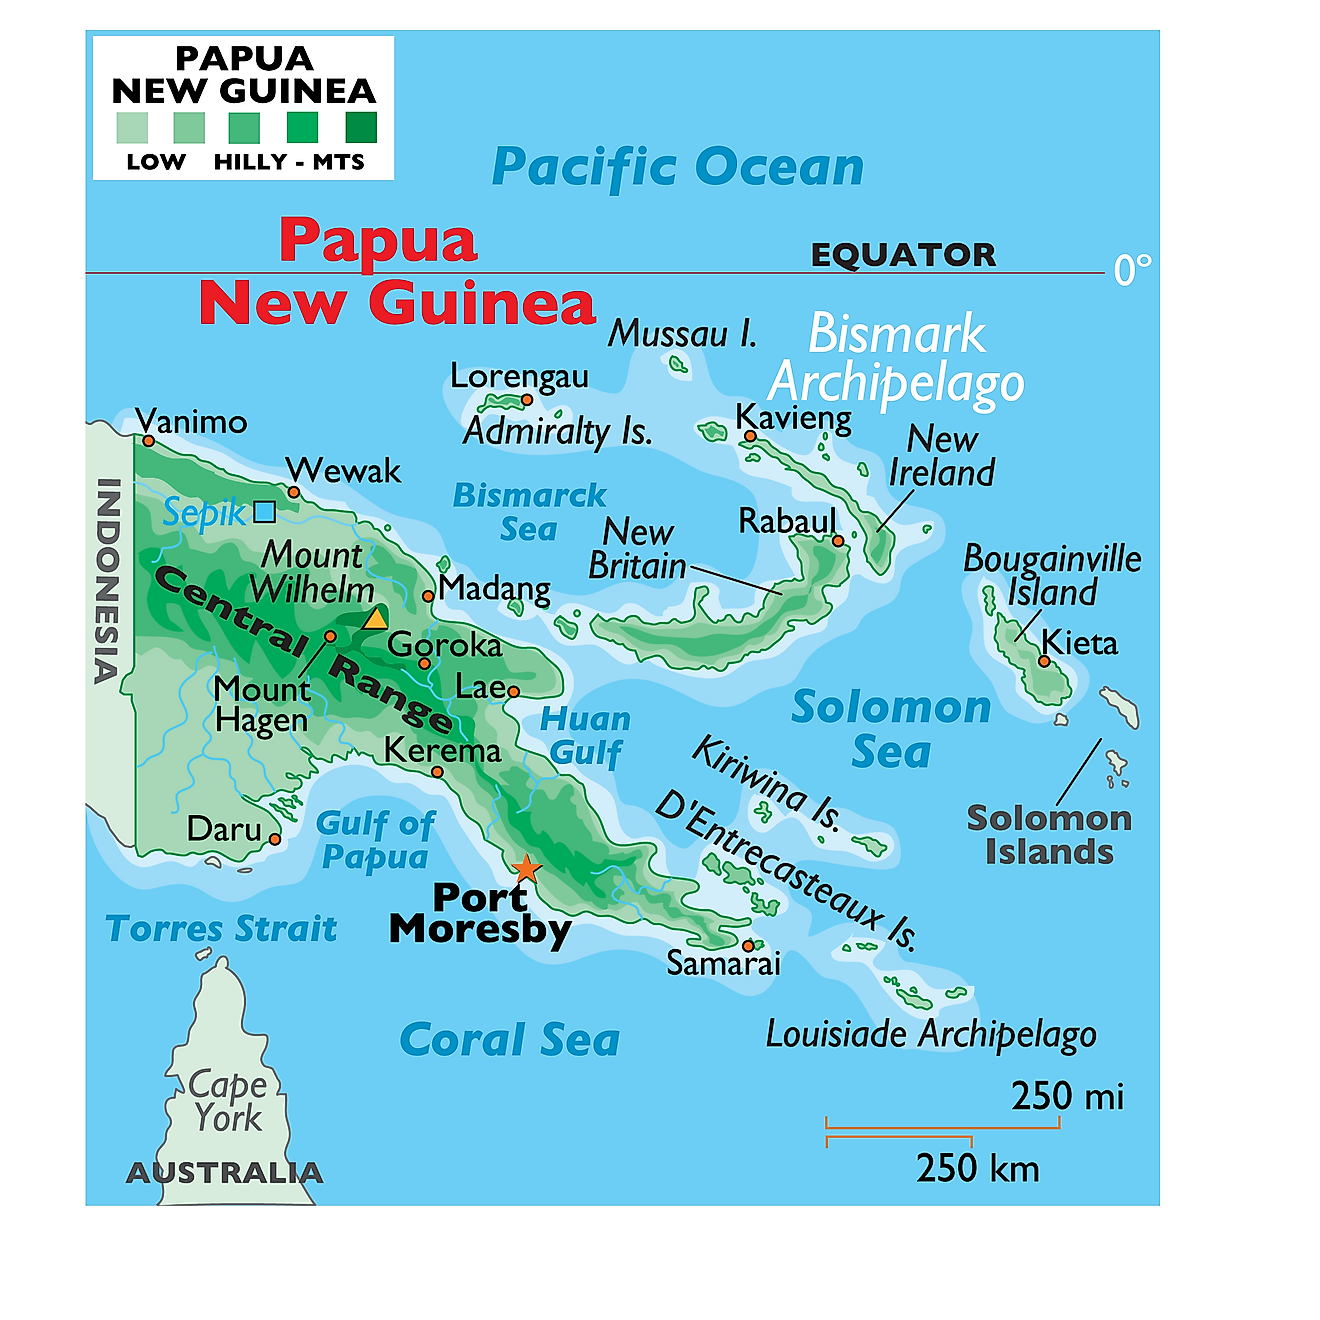 Physical Map of Papua New Guinea showing relief, mountains, major islands, surrounding seas and gulfs, and more.